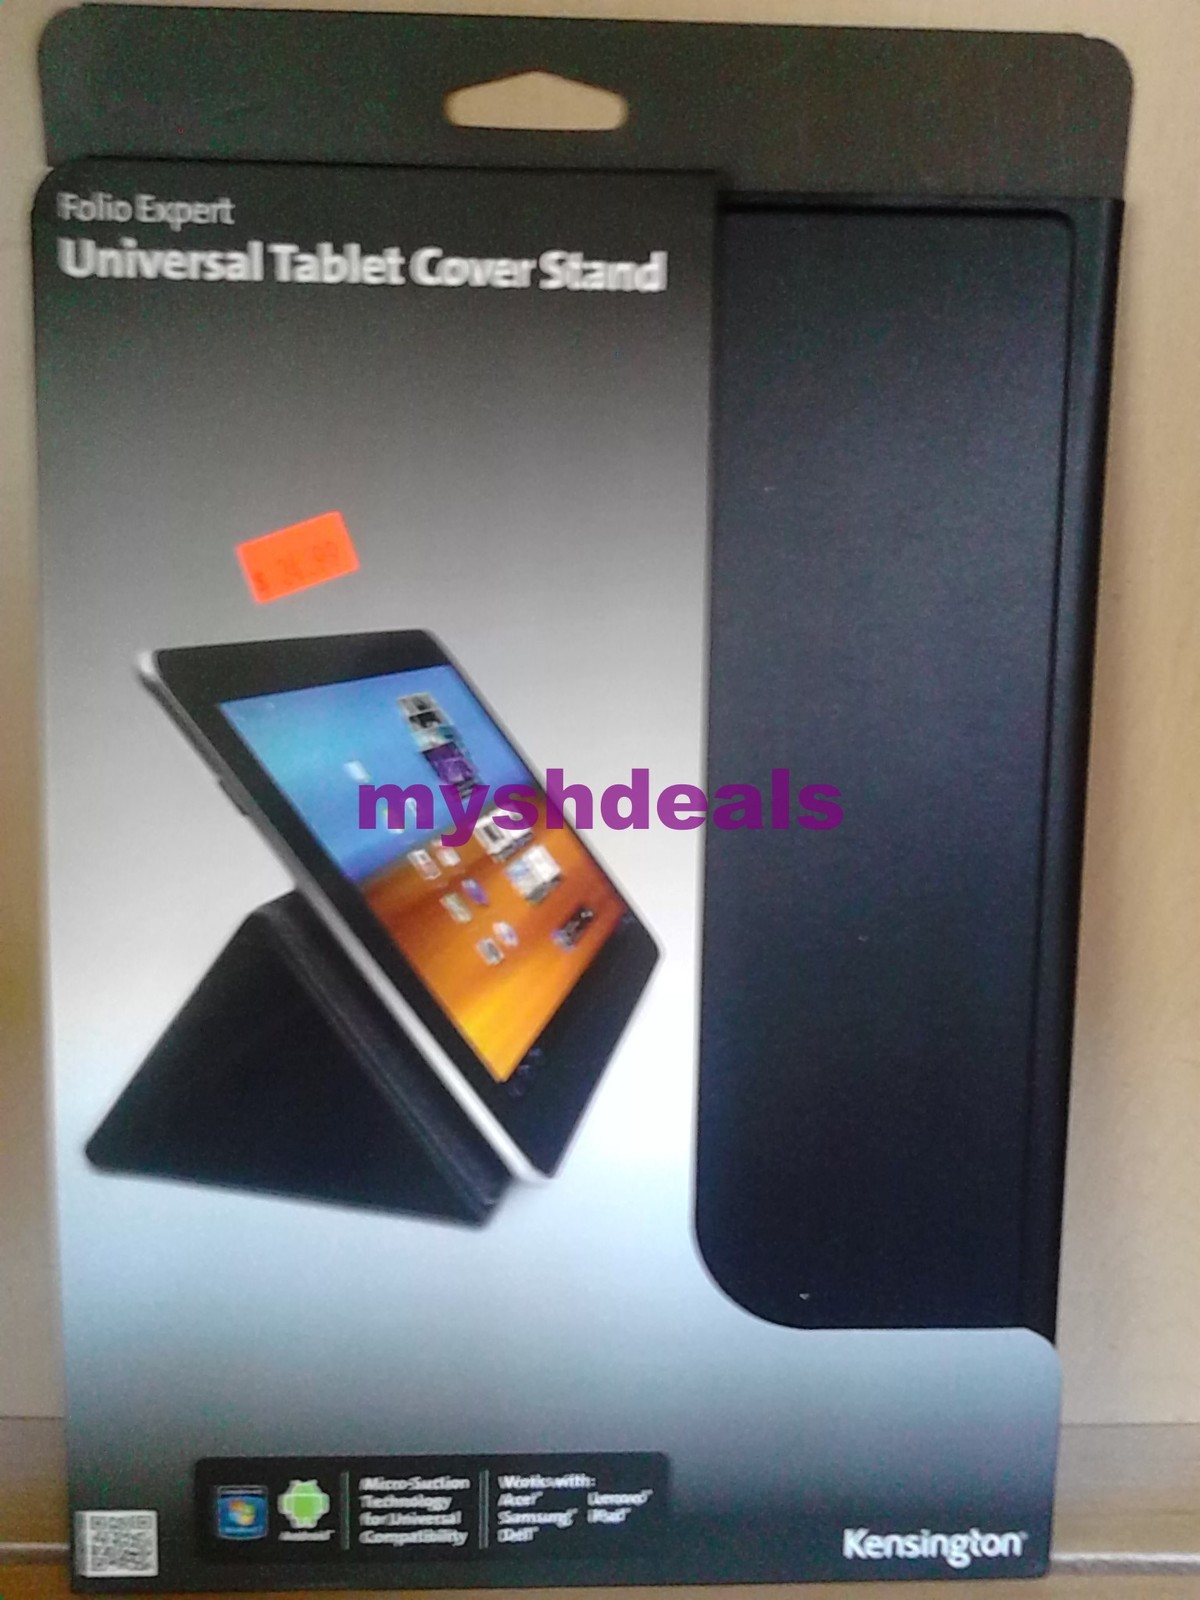 Primary image for Kensington K39591WW Folio Expert Universal Tablet Cover Stand